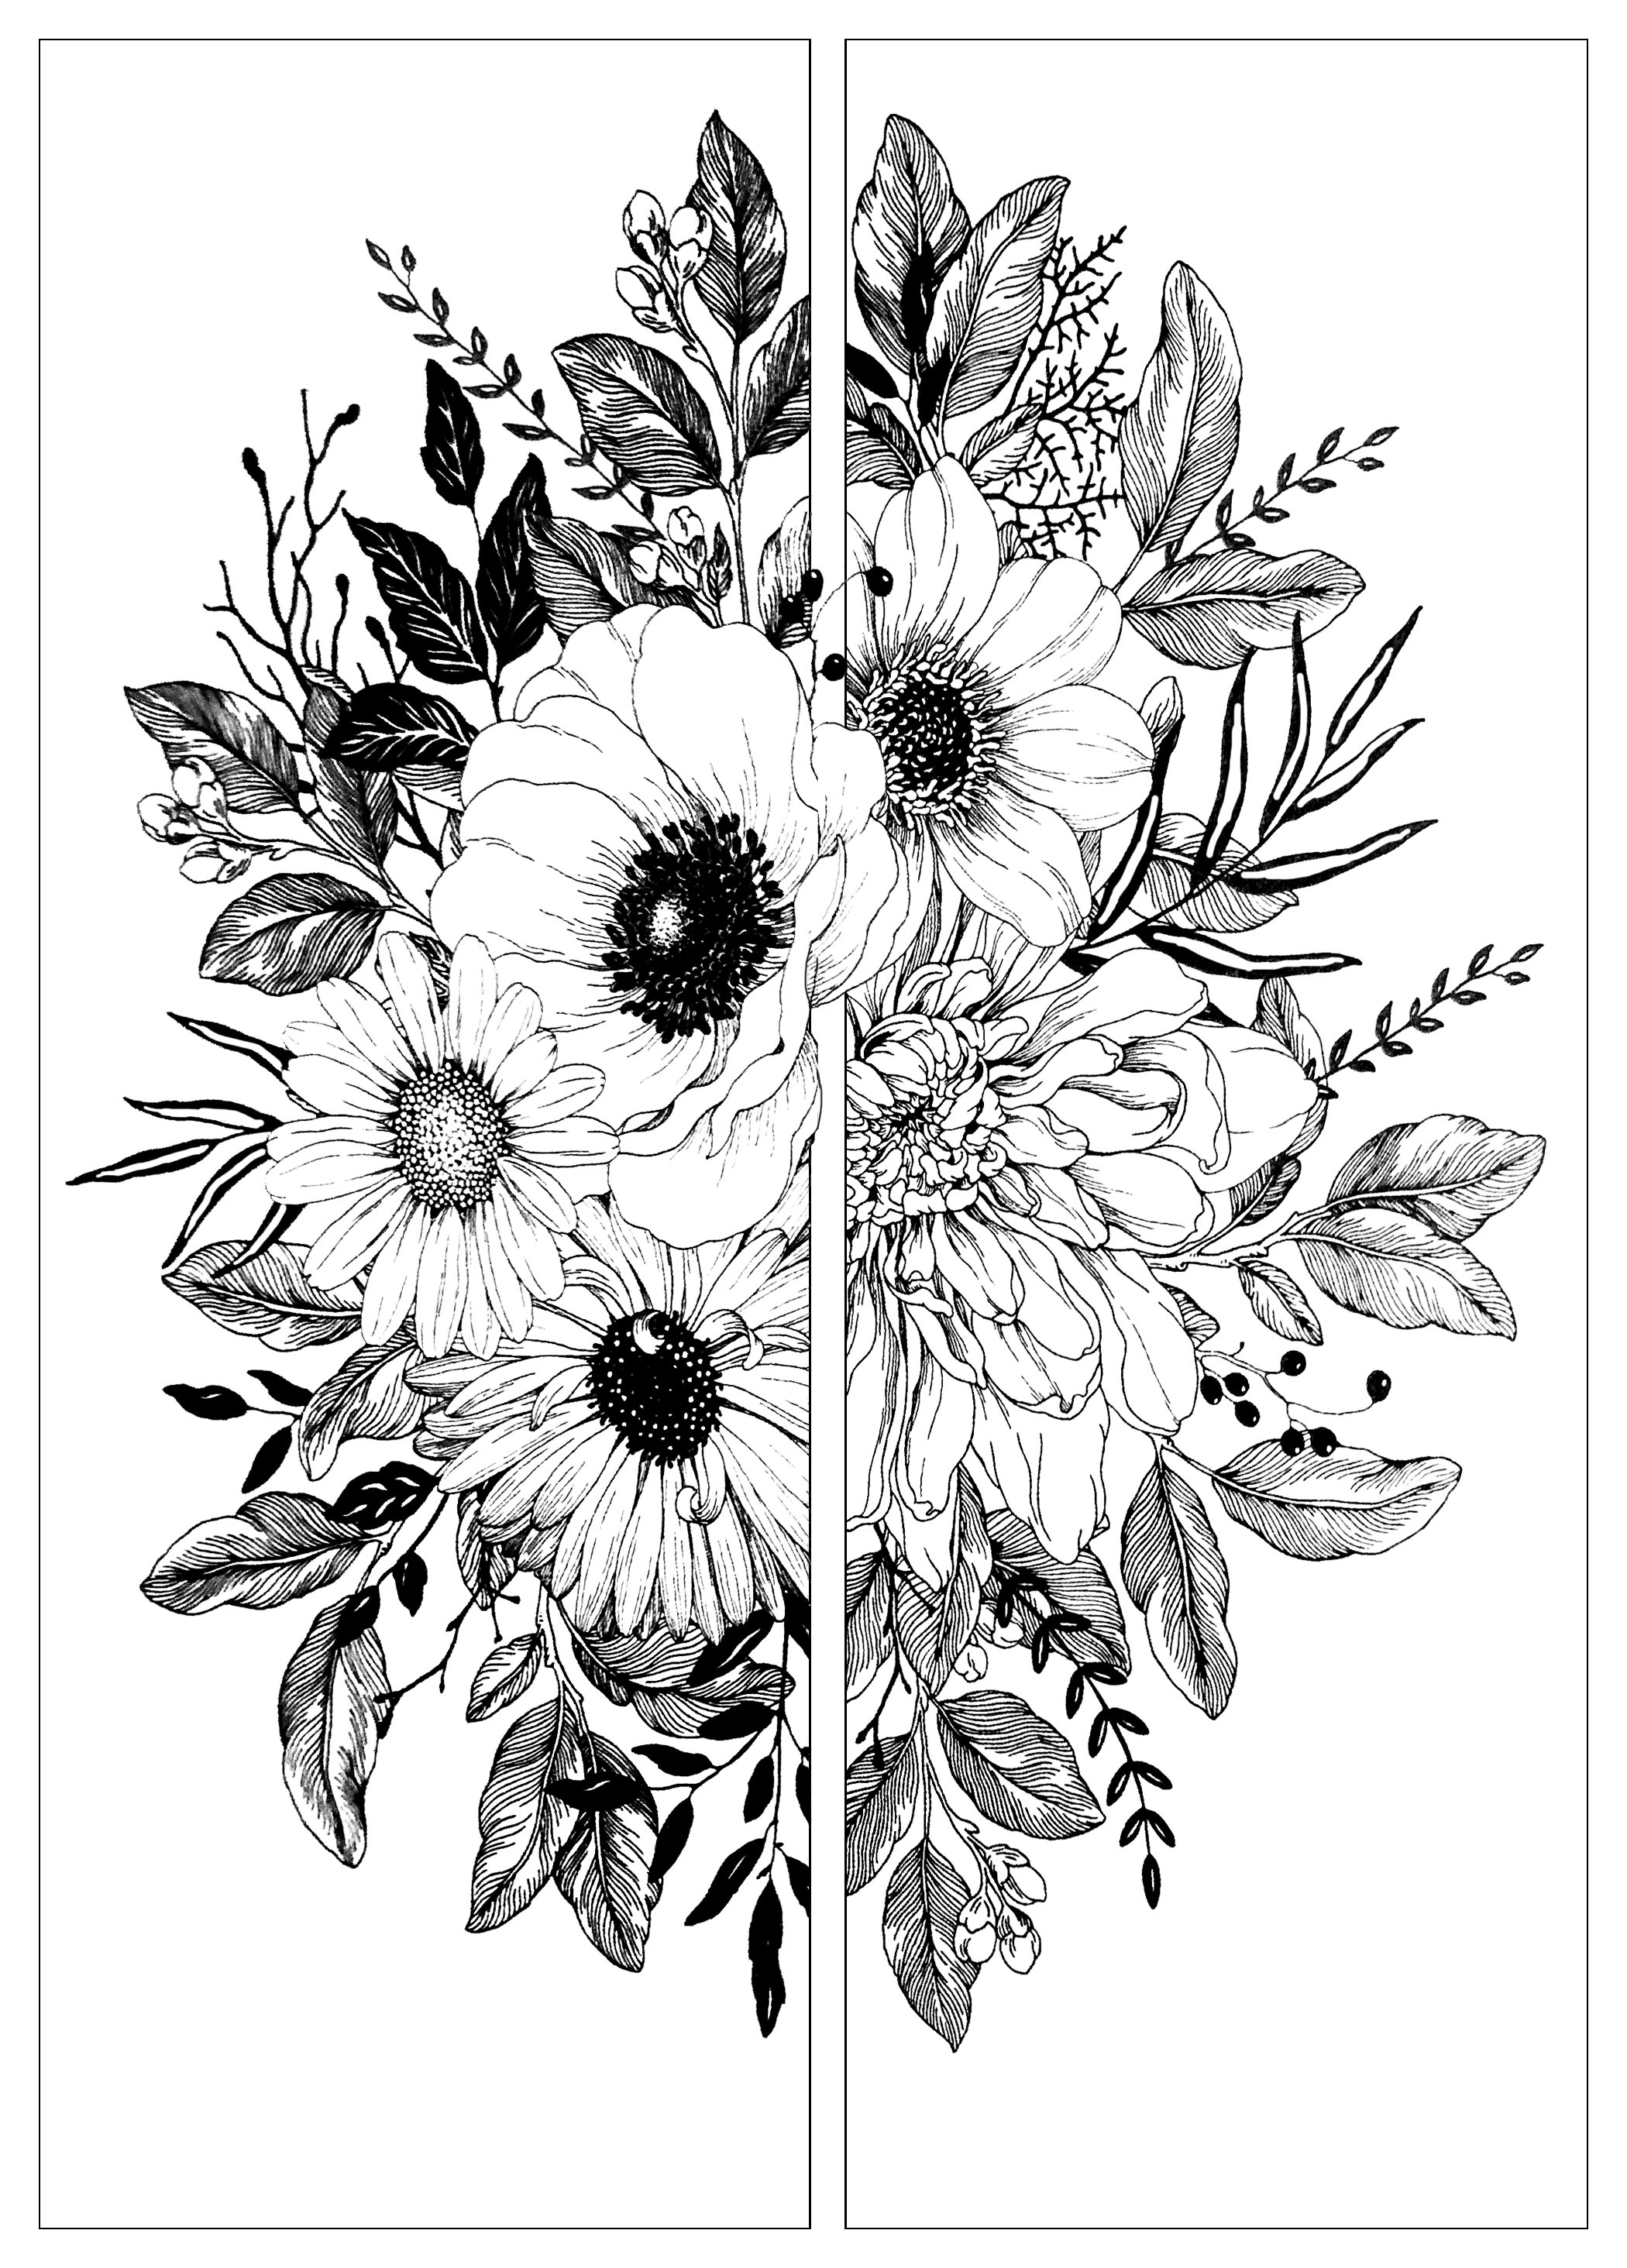 Download Flowers in two parts - Flowers Adult Coloring Pages